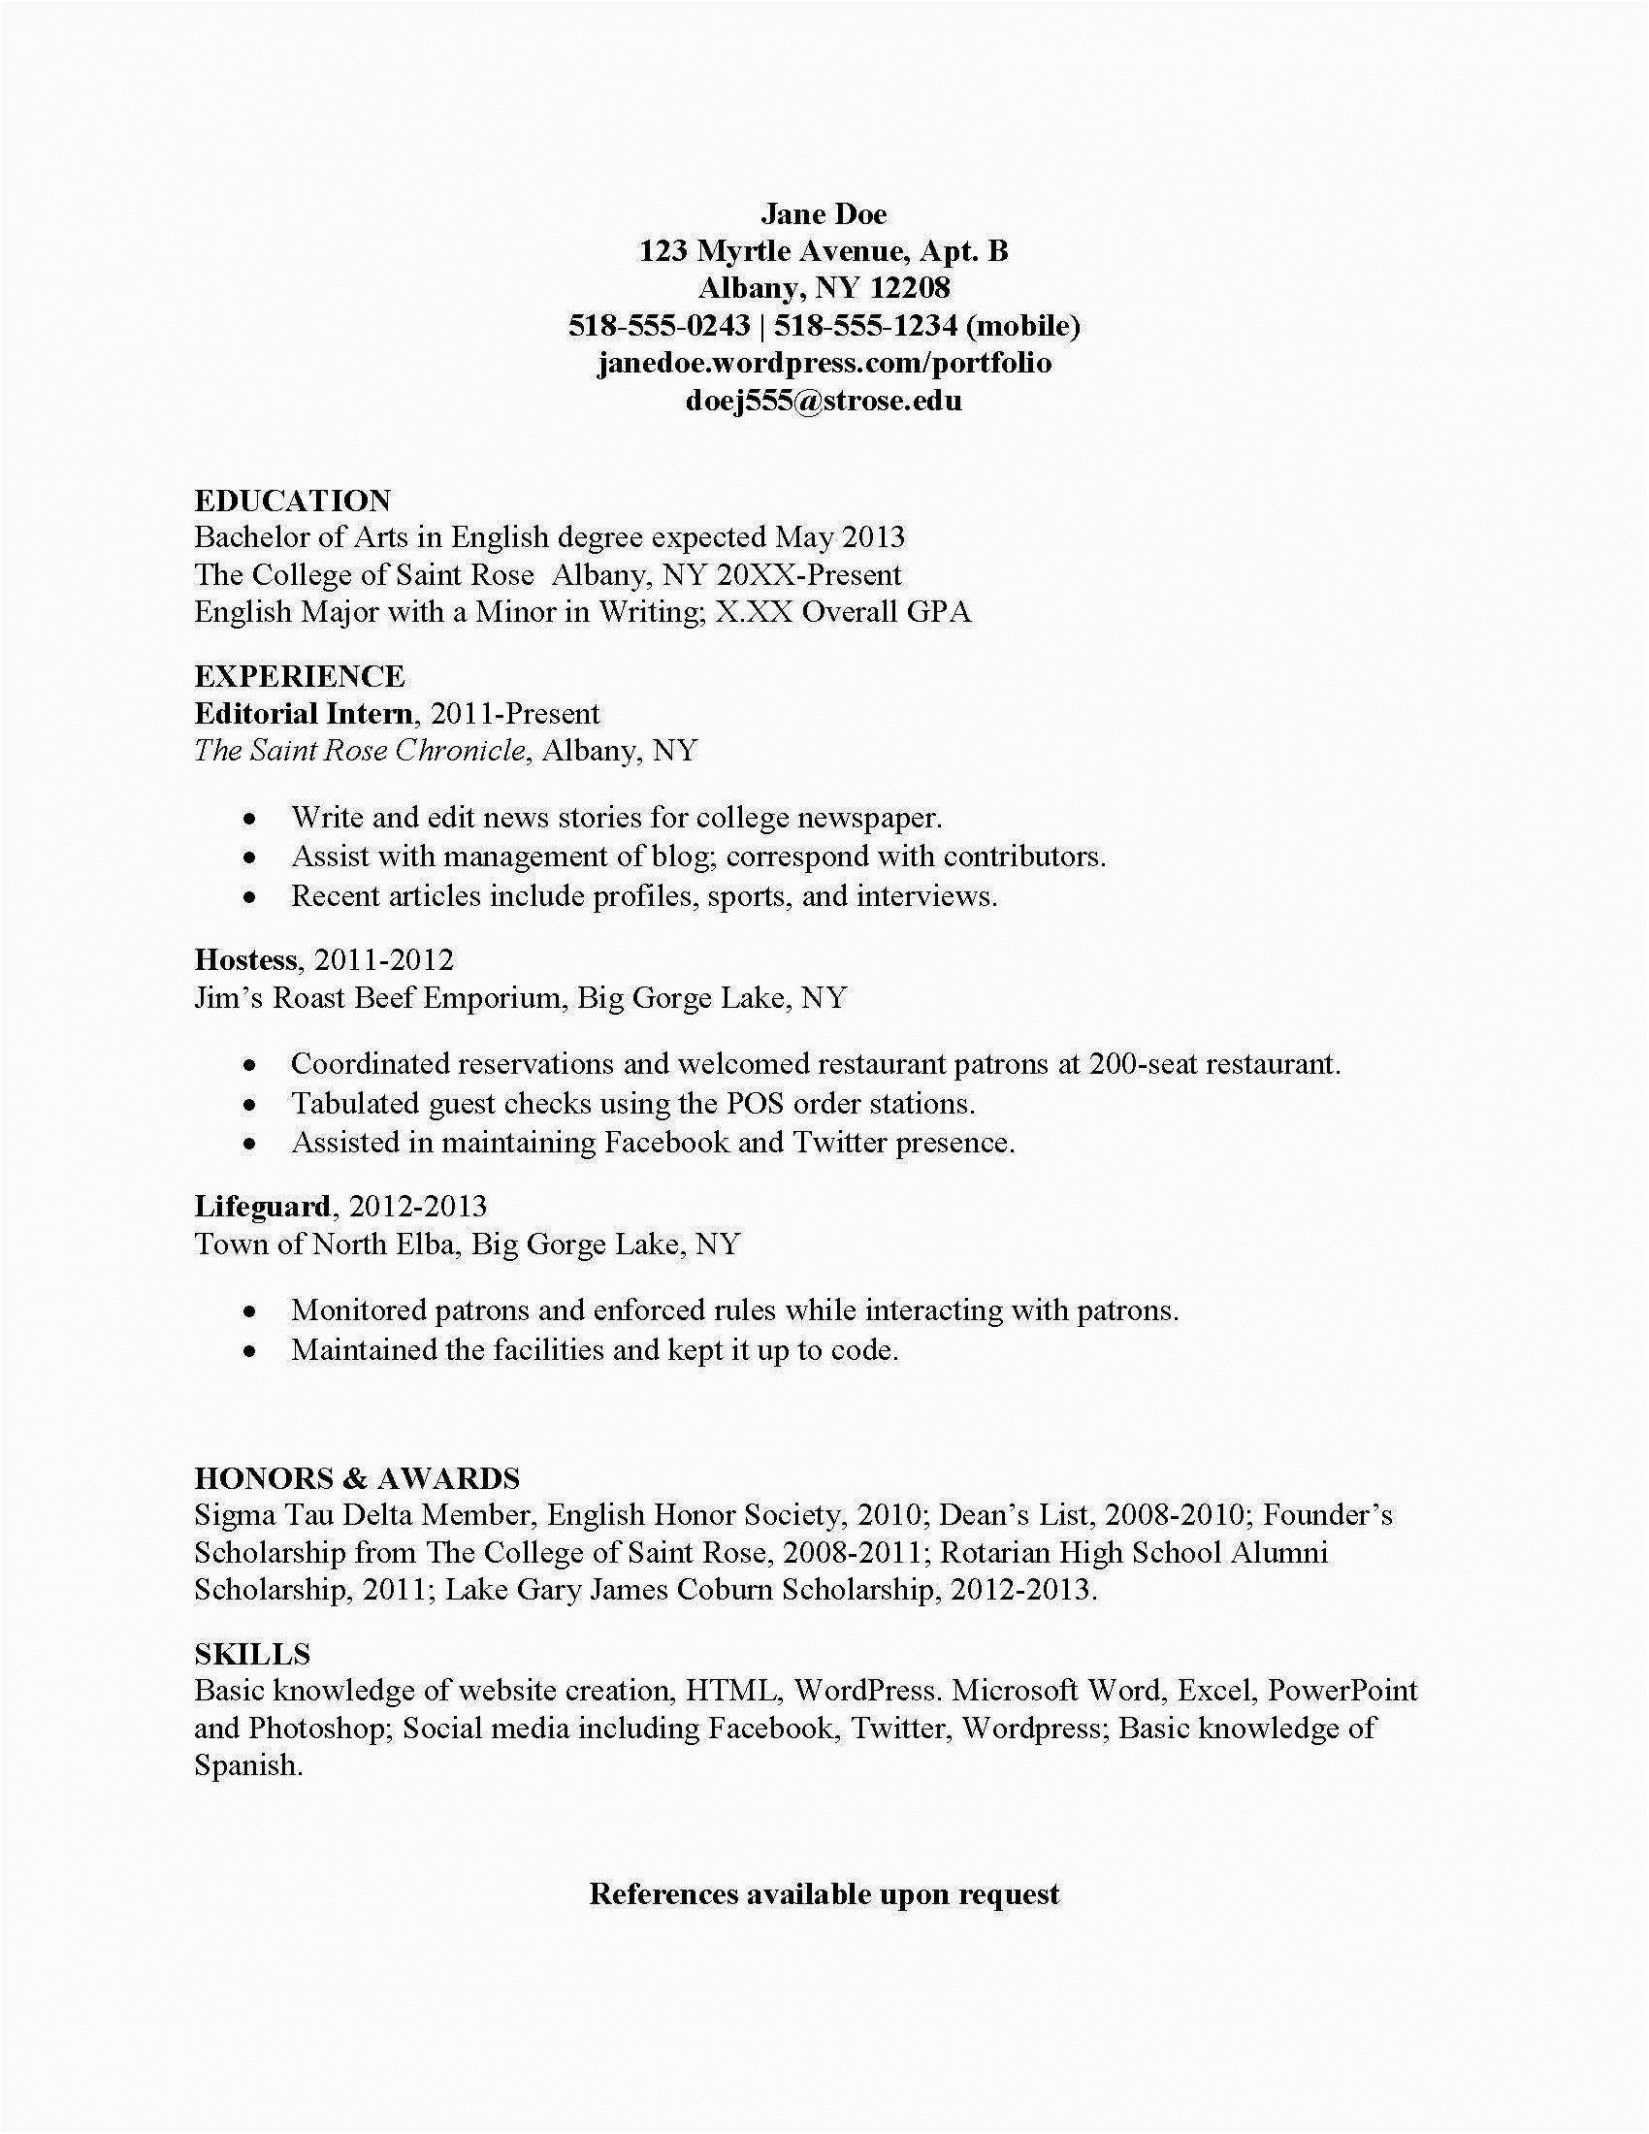 Resume Examples References Available Upon Request